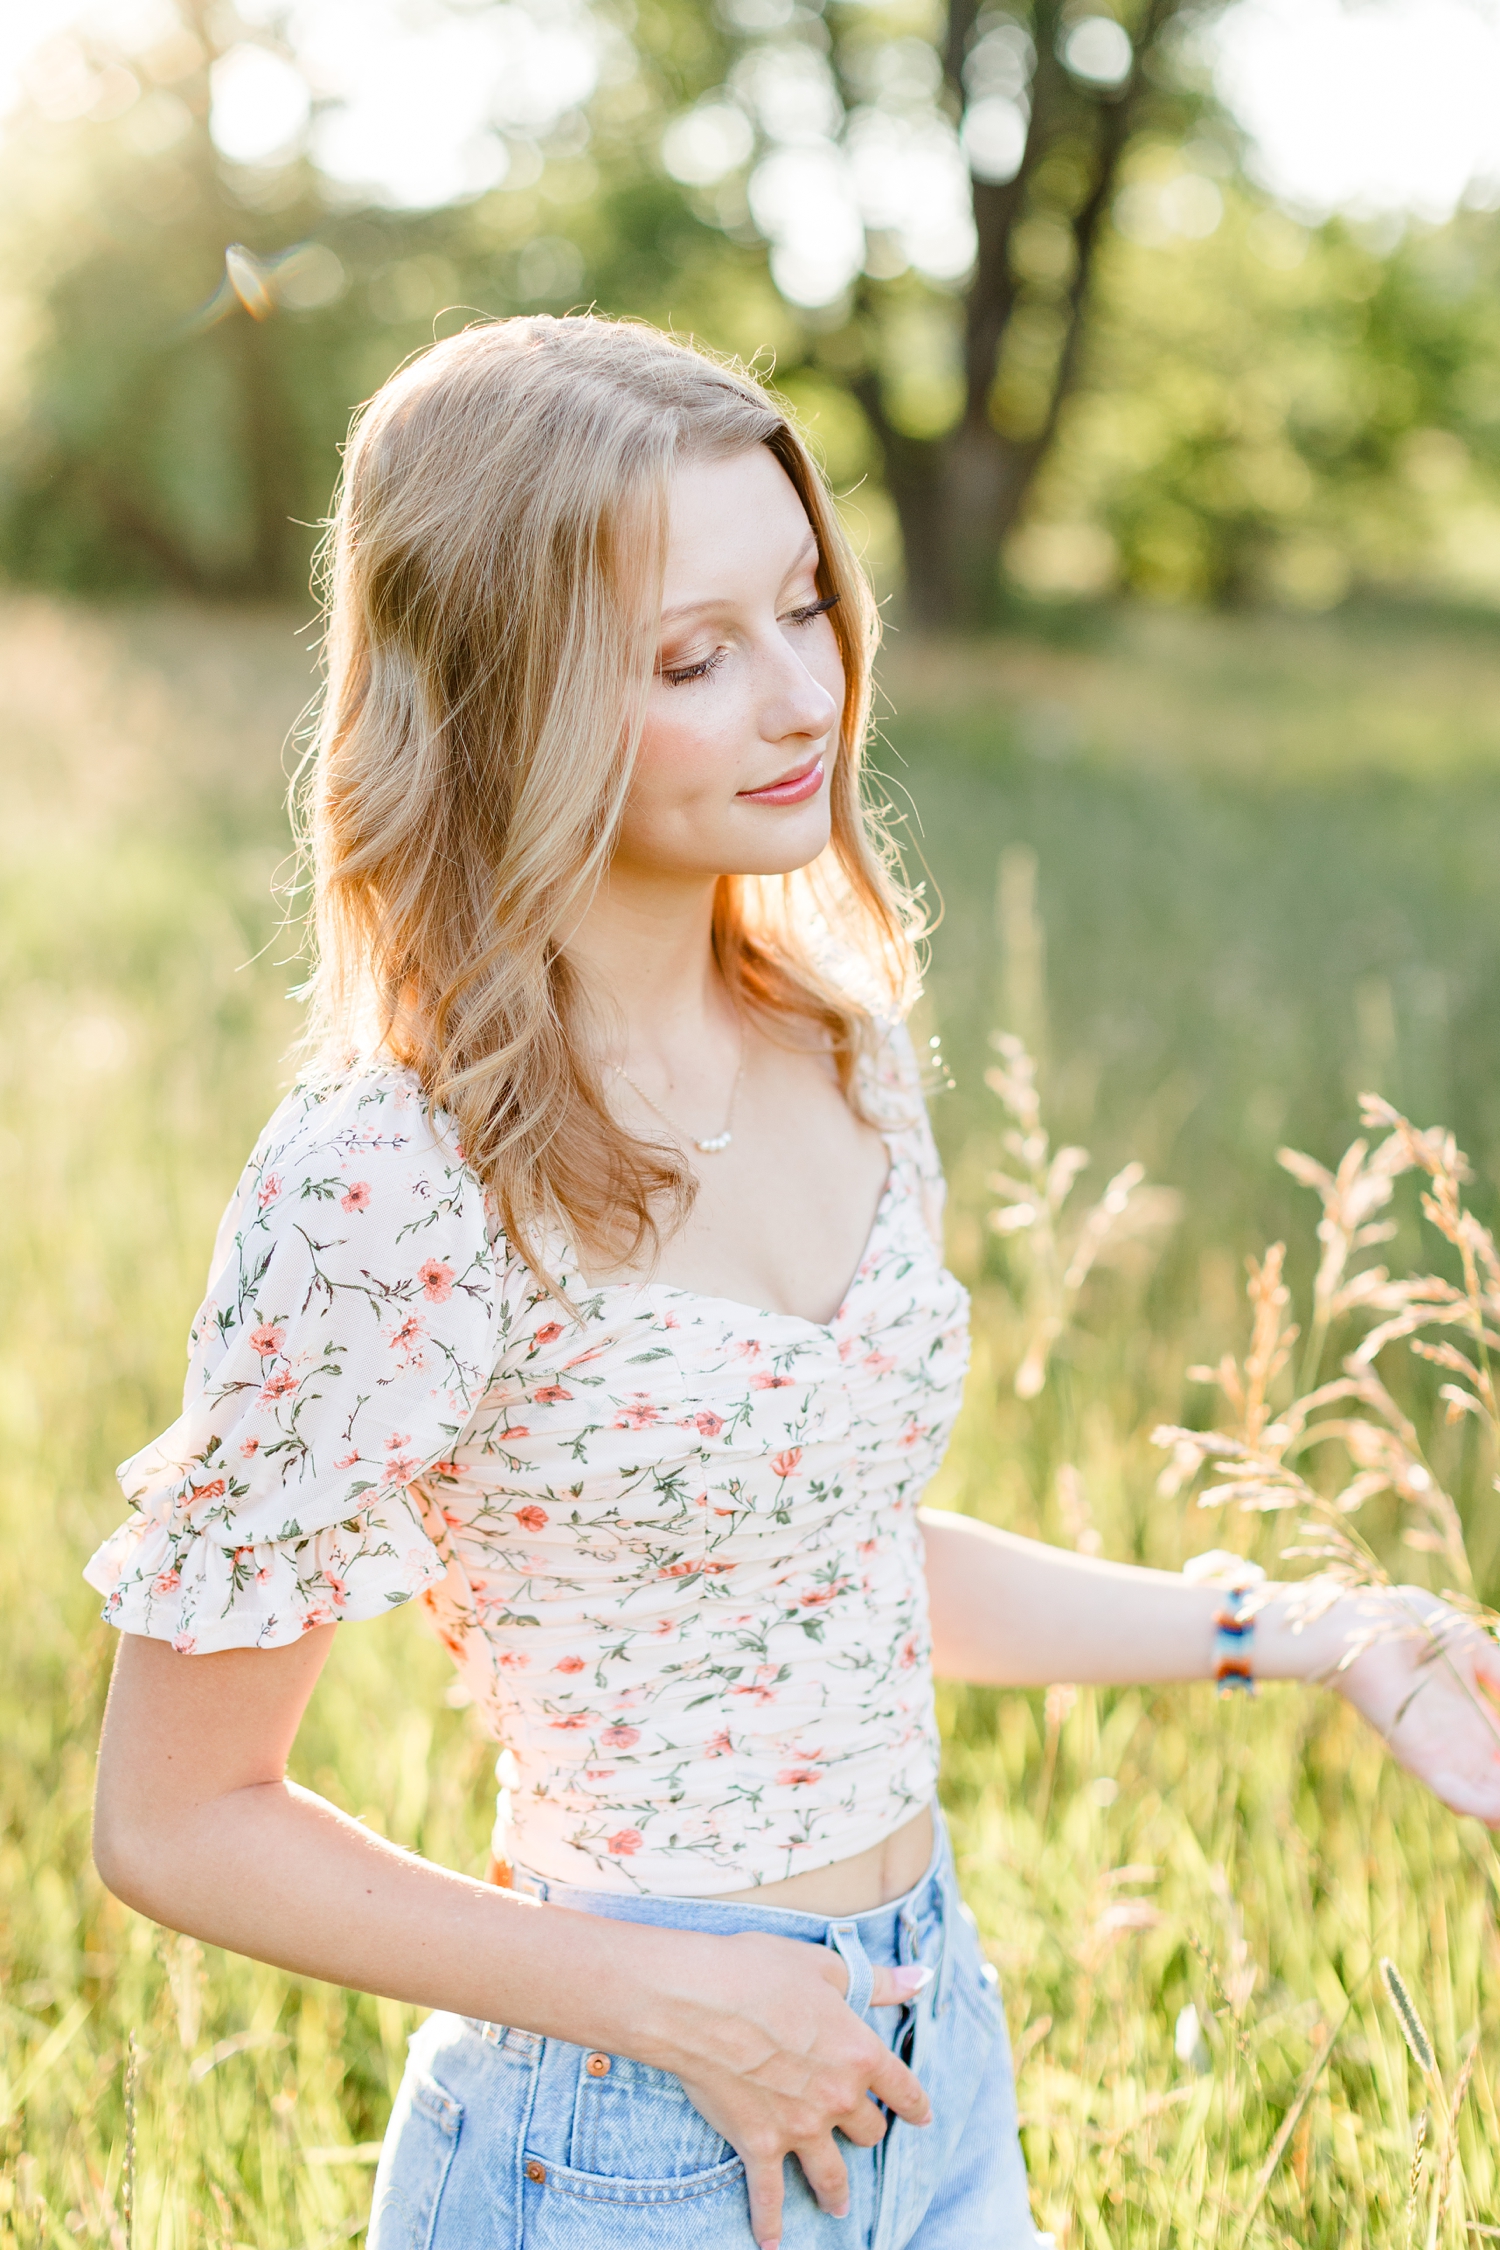 Ryley closes her eyes as she strolls through a grassy pasture at golden hour | CB Studio